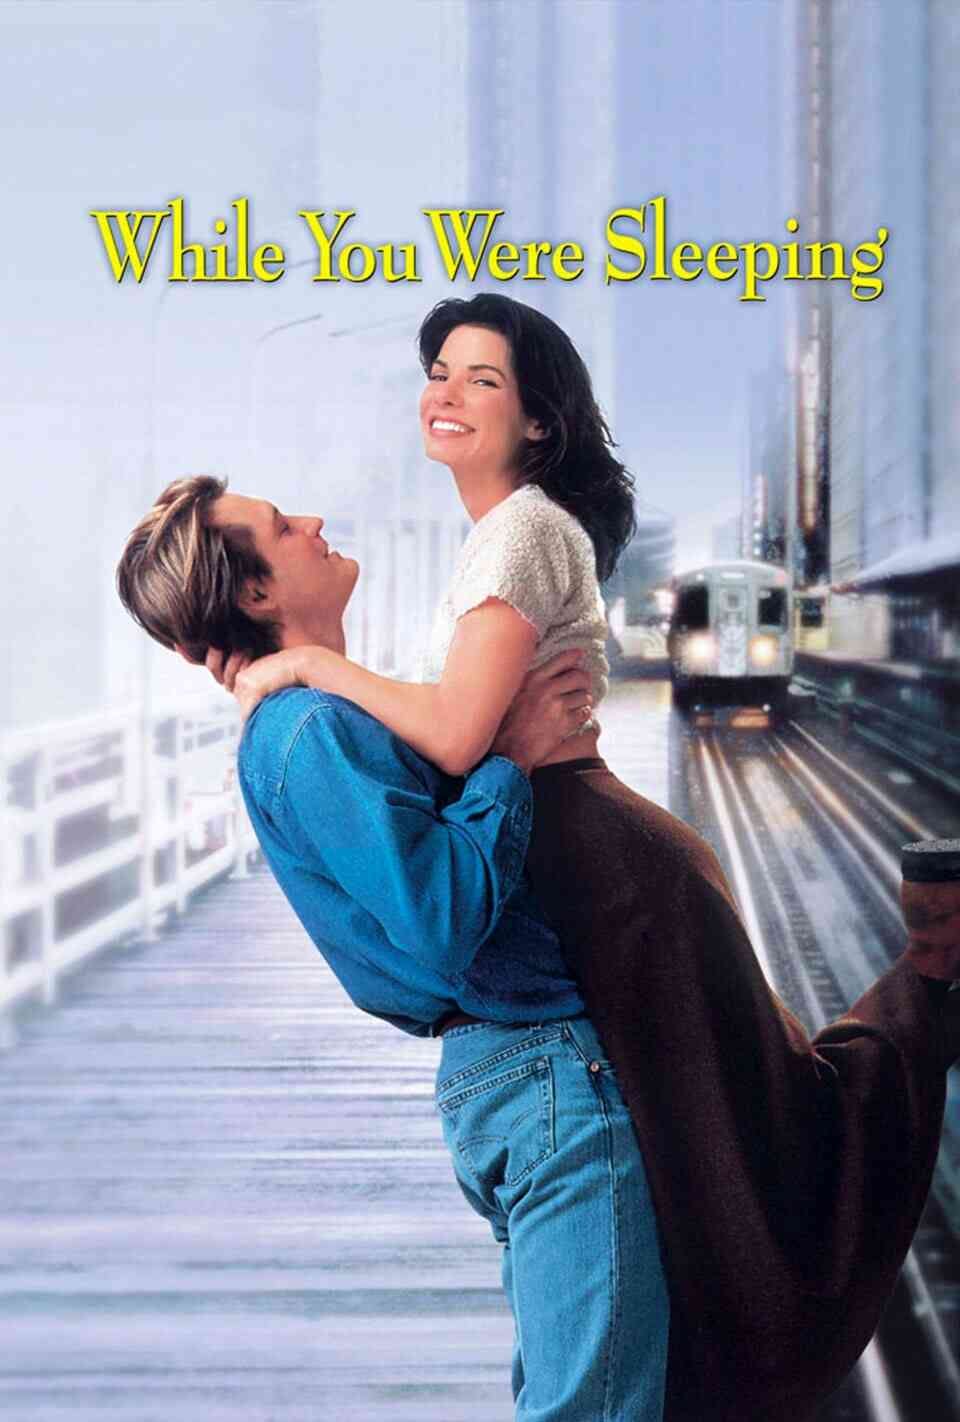 Read While You Were Sleeping screenplay (poster)